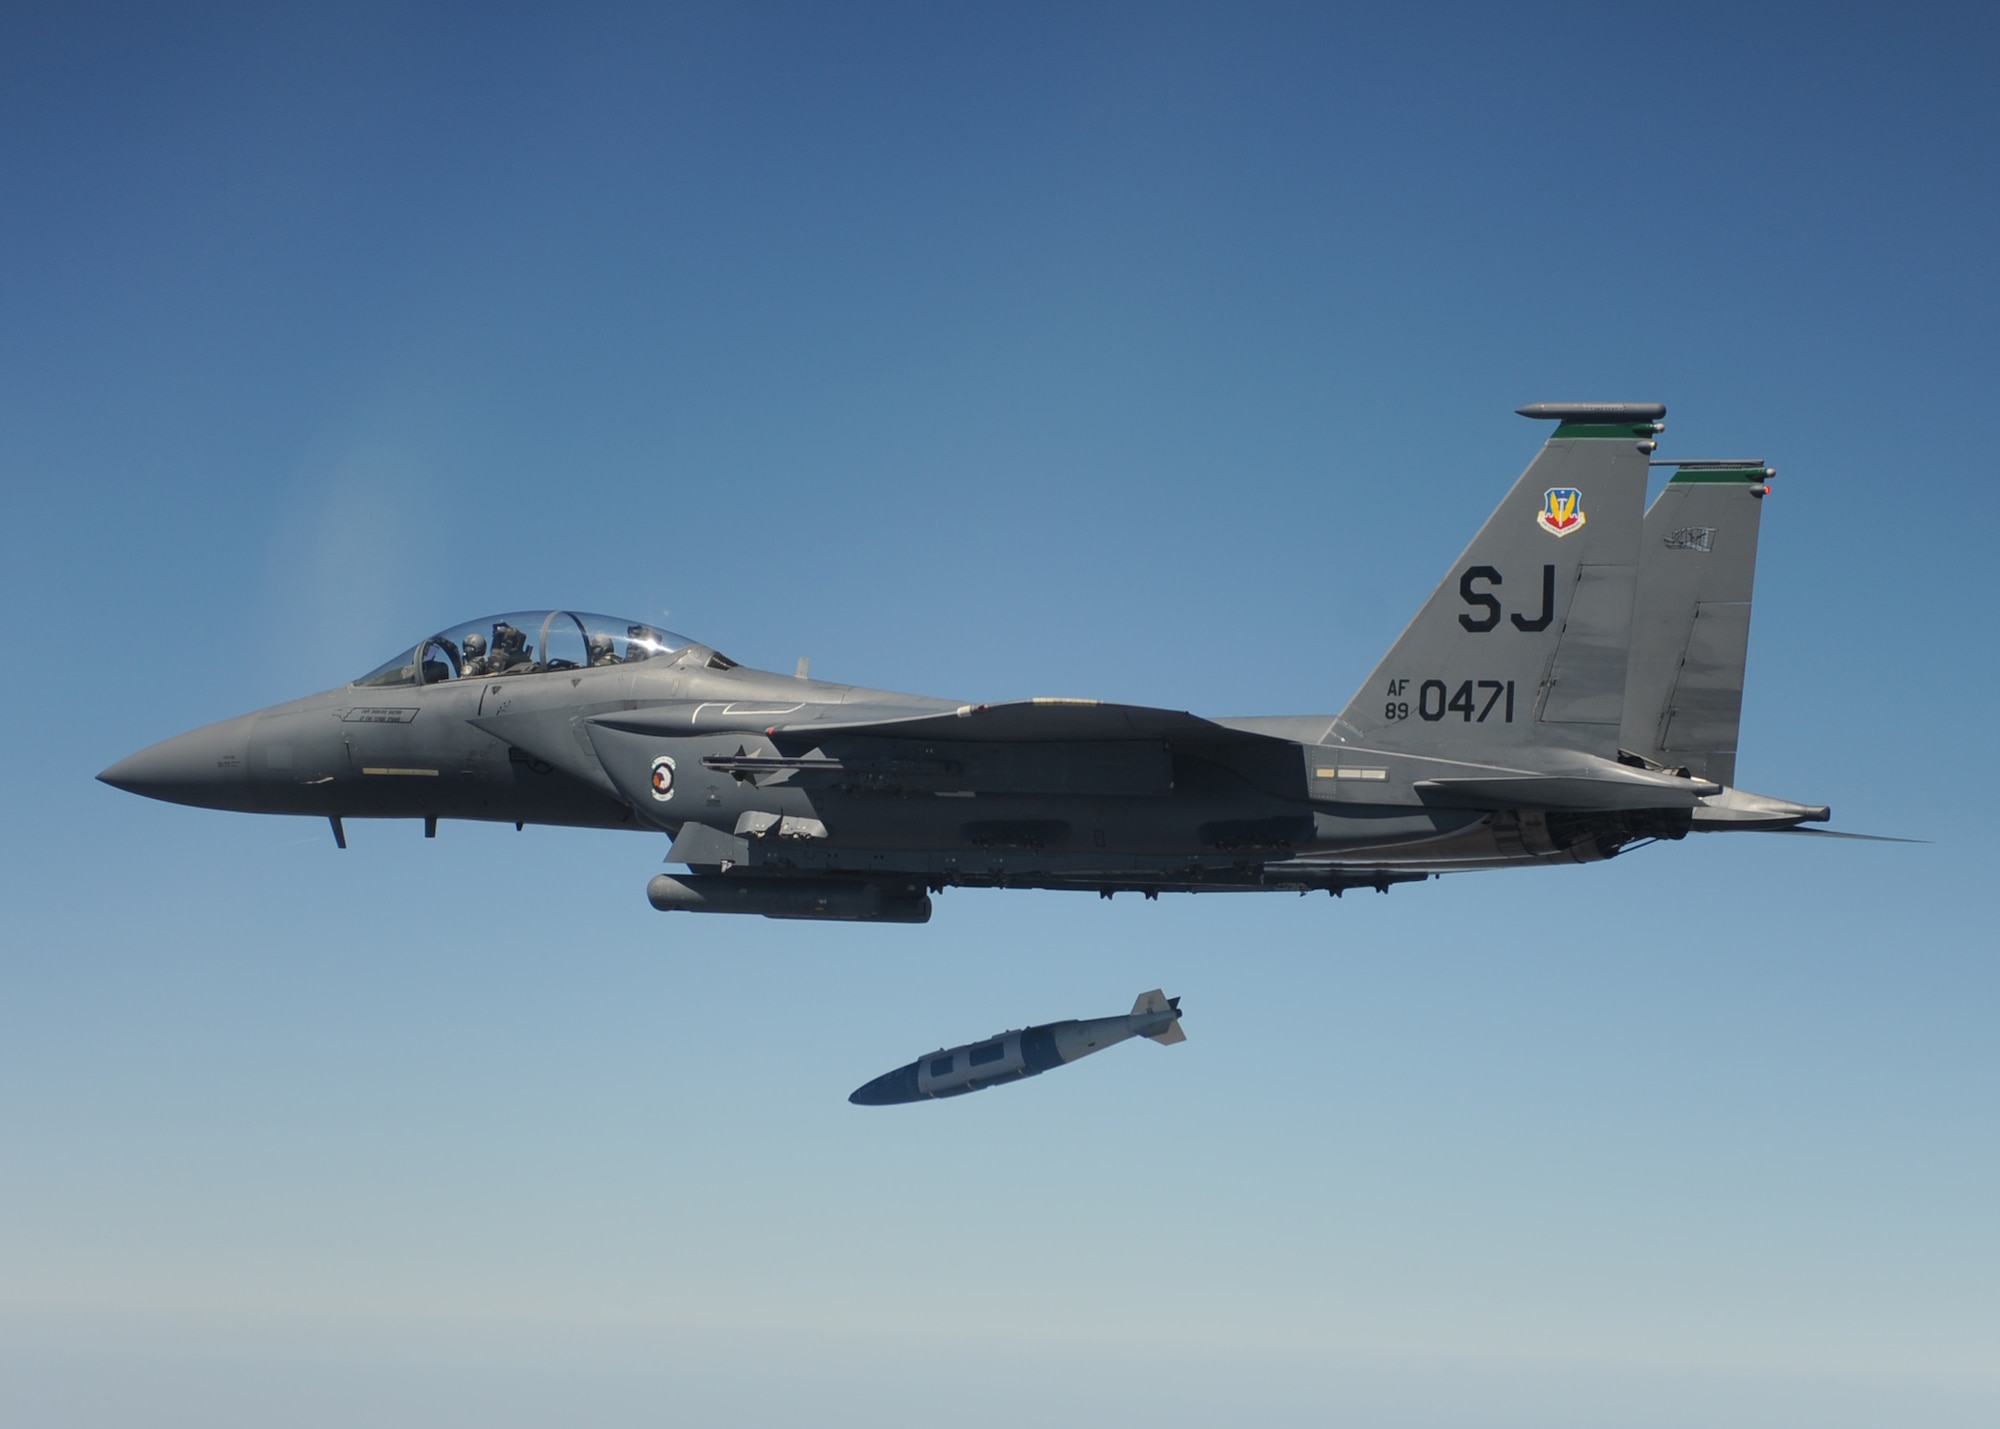 An F-15E Strike Eagle from the 4th Fighter Wing at Seymour Johnson Air Force Base, N.C., drops a Guided Bomb Unit 31 during a Combat Hammer mission over the Eglin Air Force Base Range during the week of March 16.  Combat Hammer is also known as a Weapons System Evaluation Program for air-to-ground weapons.  The 83rd Fighter Weapons Squadron executes the 'Hammer' missions by evaluating the entire weapons process from loading to flight to the target.  Flying squadrons 'deploy' to Eglin for the week-long evaluation.  Courtesy photo.